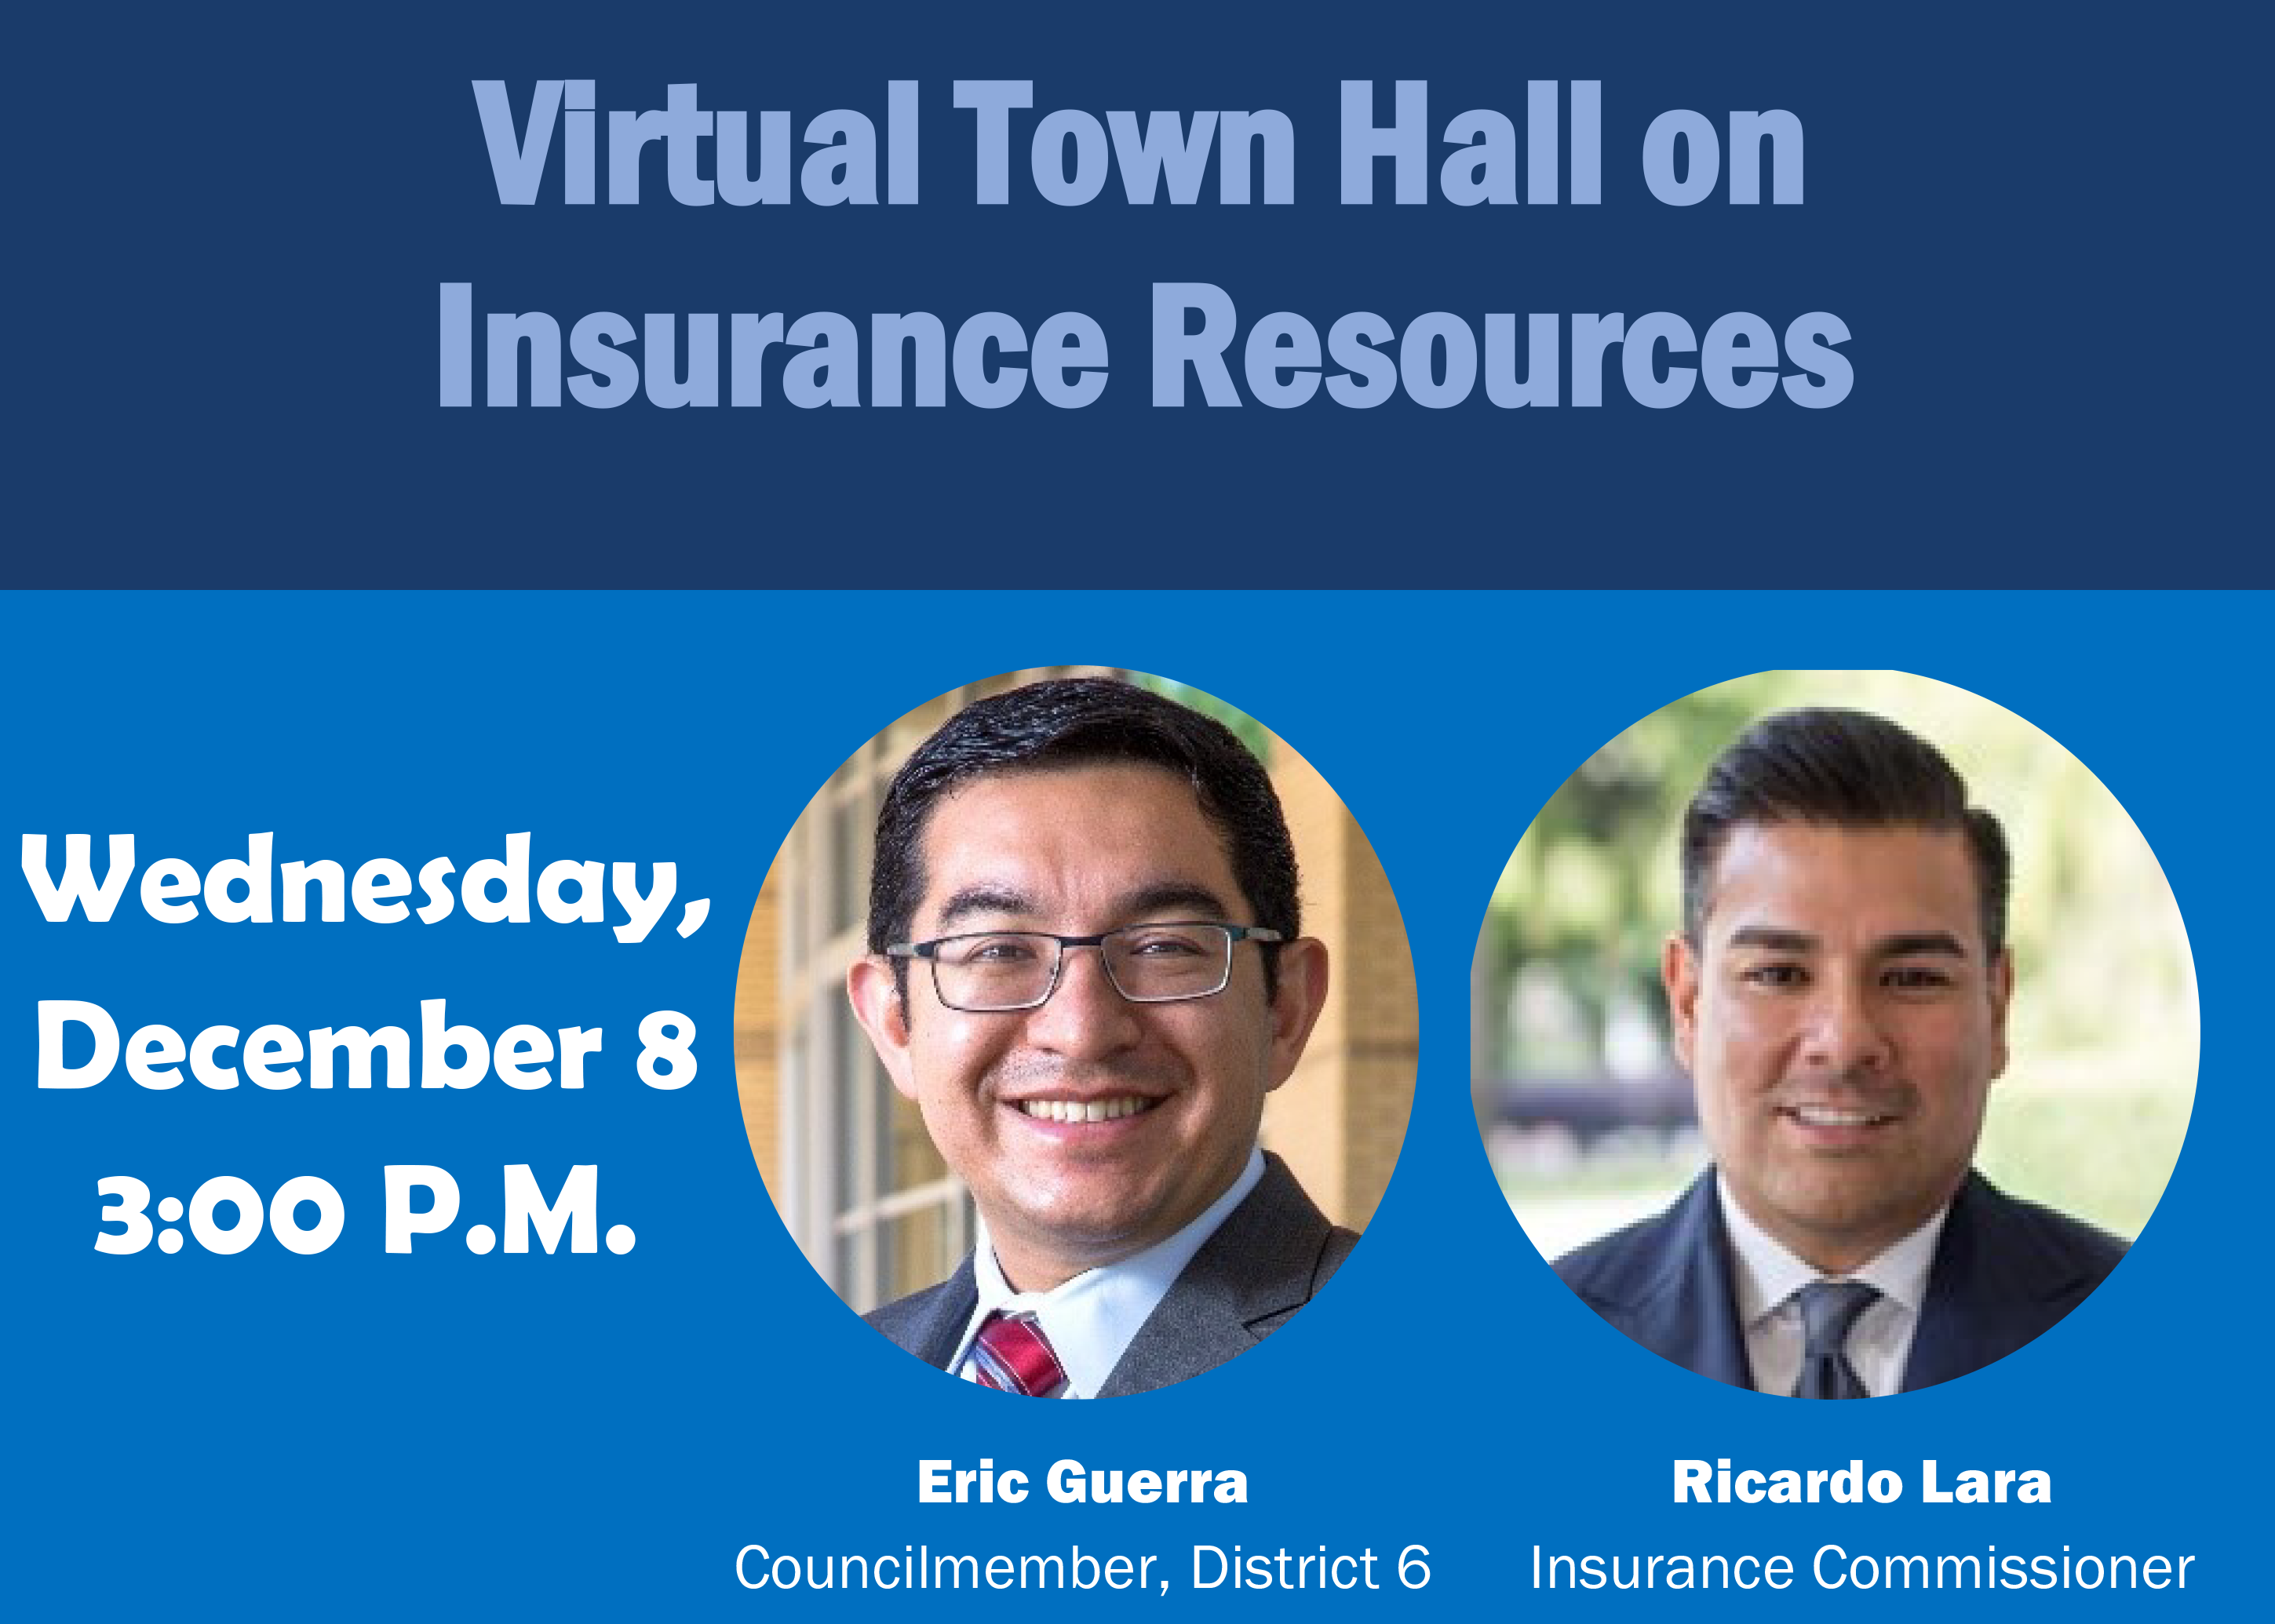 Virtual Town Hall on Insurance Resources Wednesday, December 8, 3:00 P.M.,Eric Guerra Councilmember, District 6 Ricardo Lara Insurance Commissioner